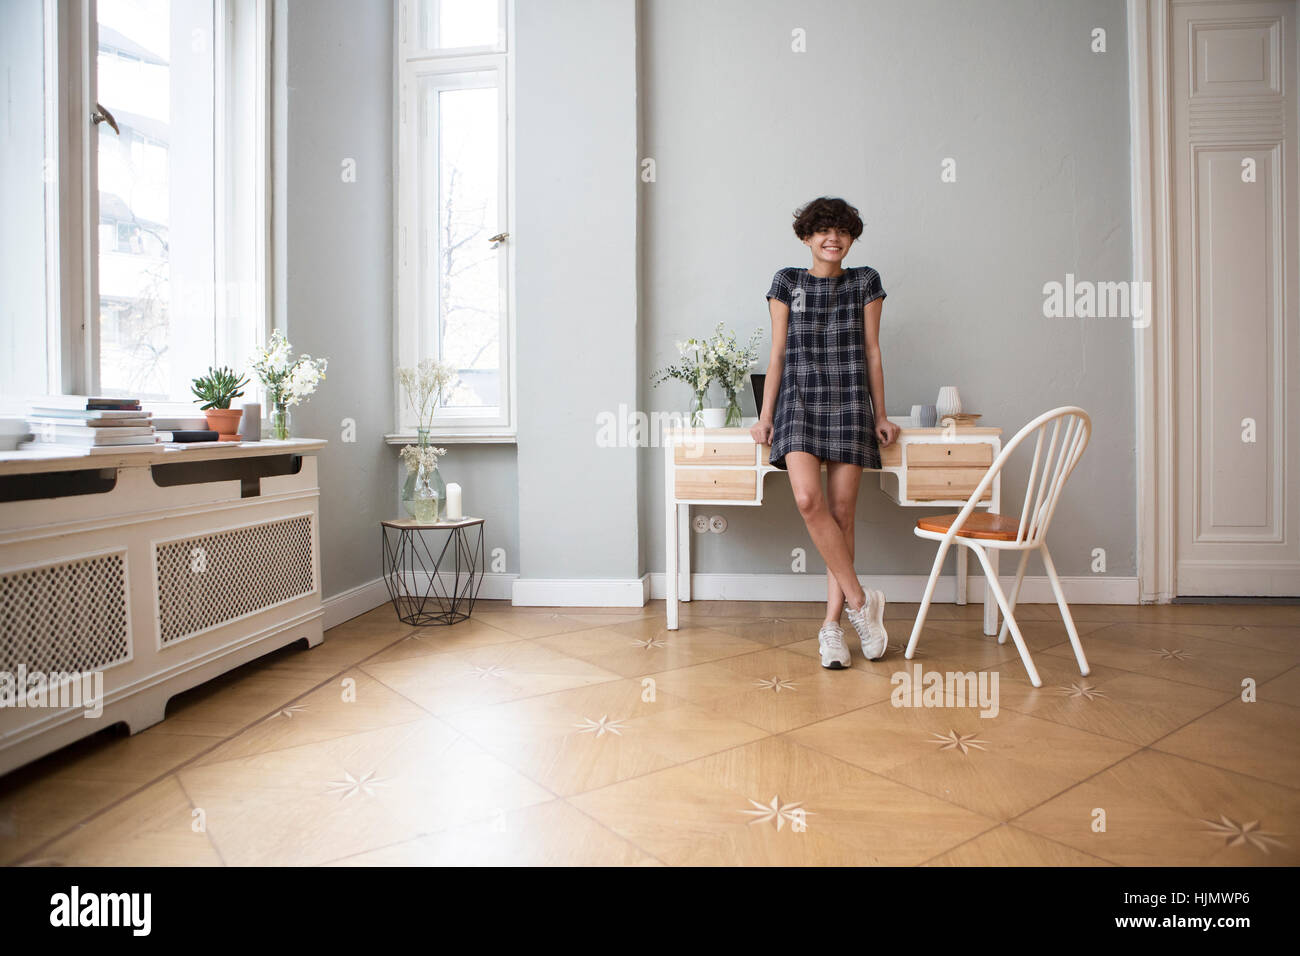 Portrait of happy young woman at home Banque D'Images